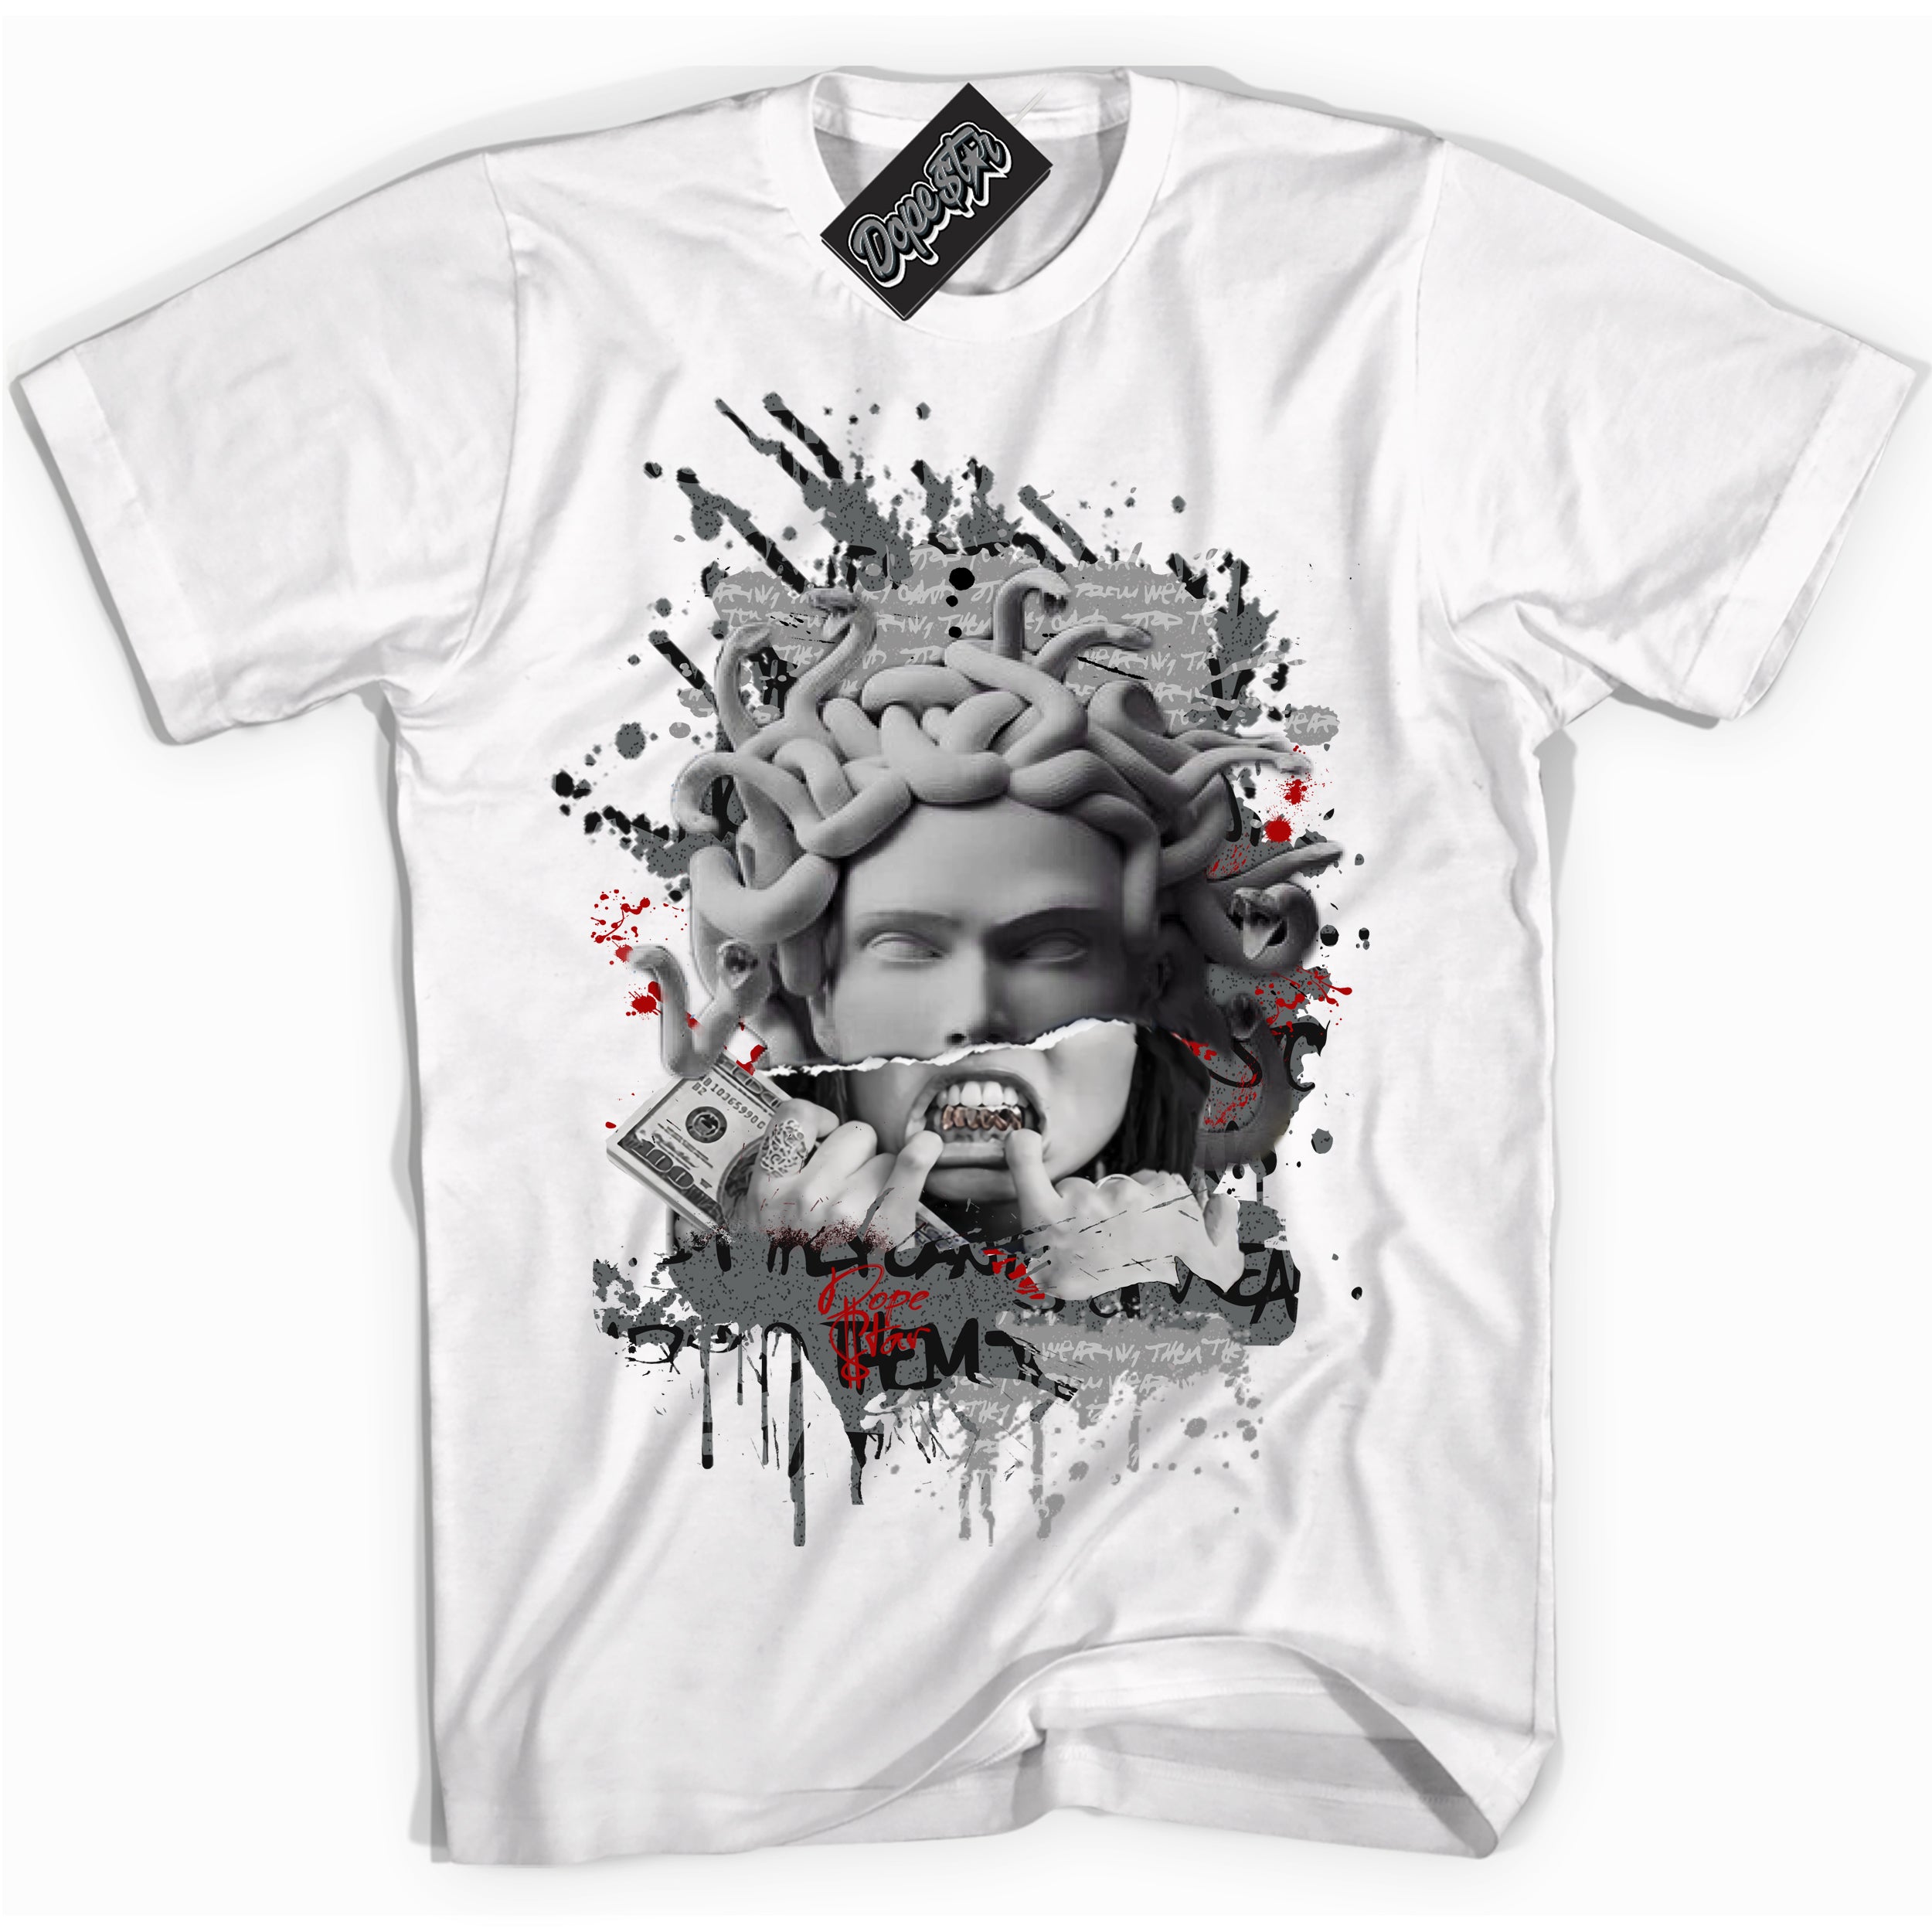 Cool White Shirt with “ Medusa ” design that perfectly matches Rebellionaire 1s Sneakers.